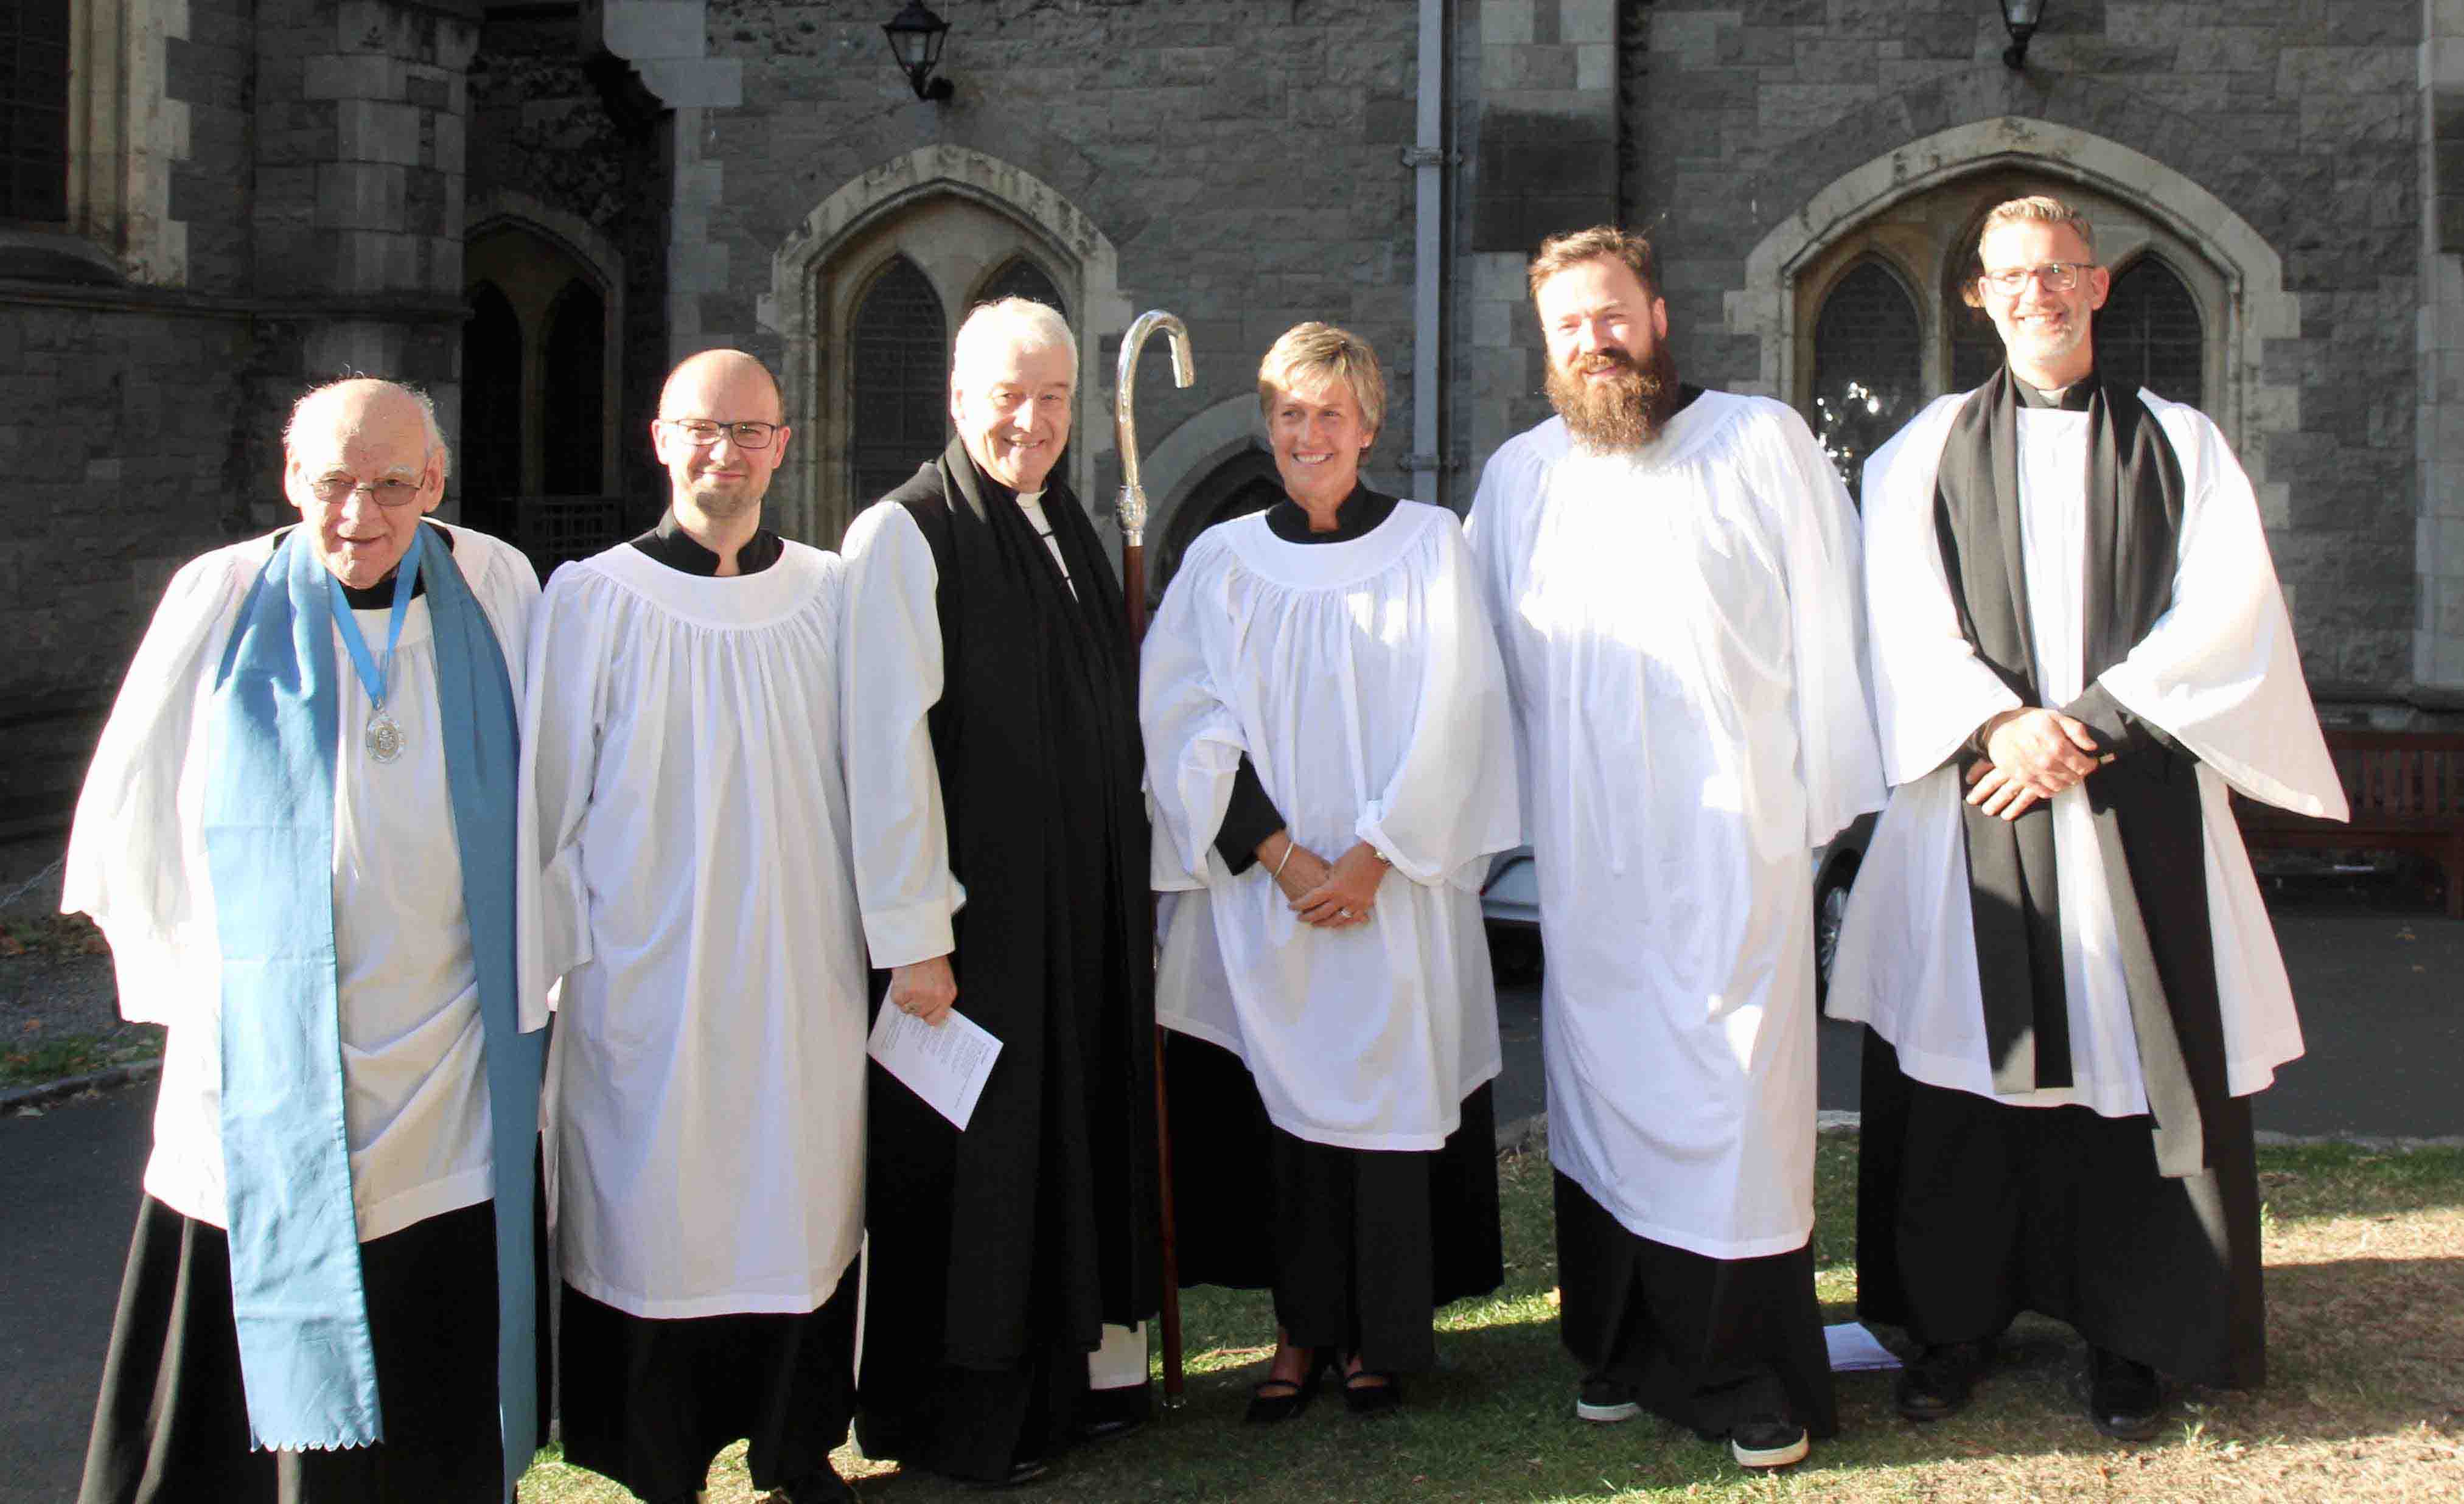 Scott Hill, Ruth Gyves and Scott Evans with Archbishop Michael Jackson, Edward Lewis and the Revd Rob Jones before they were commissioned as Diocesan Readers.